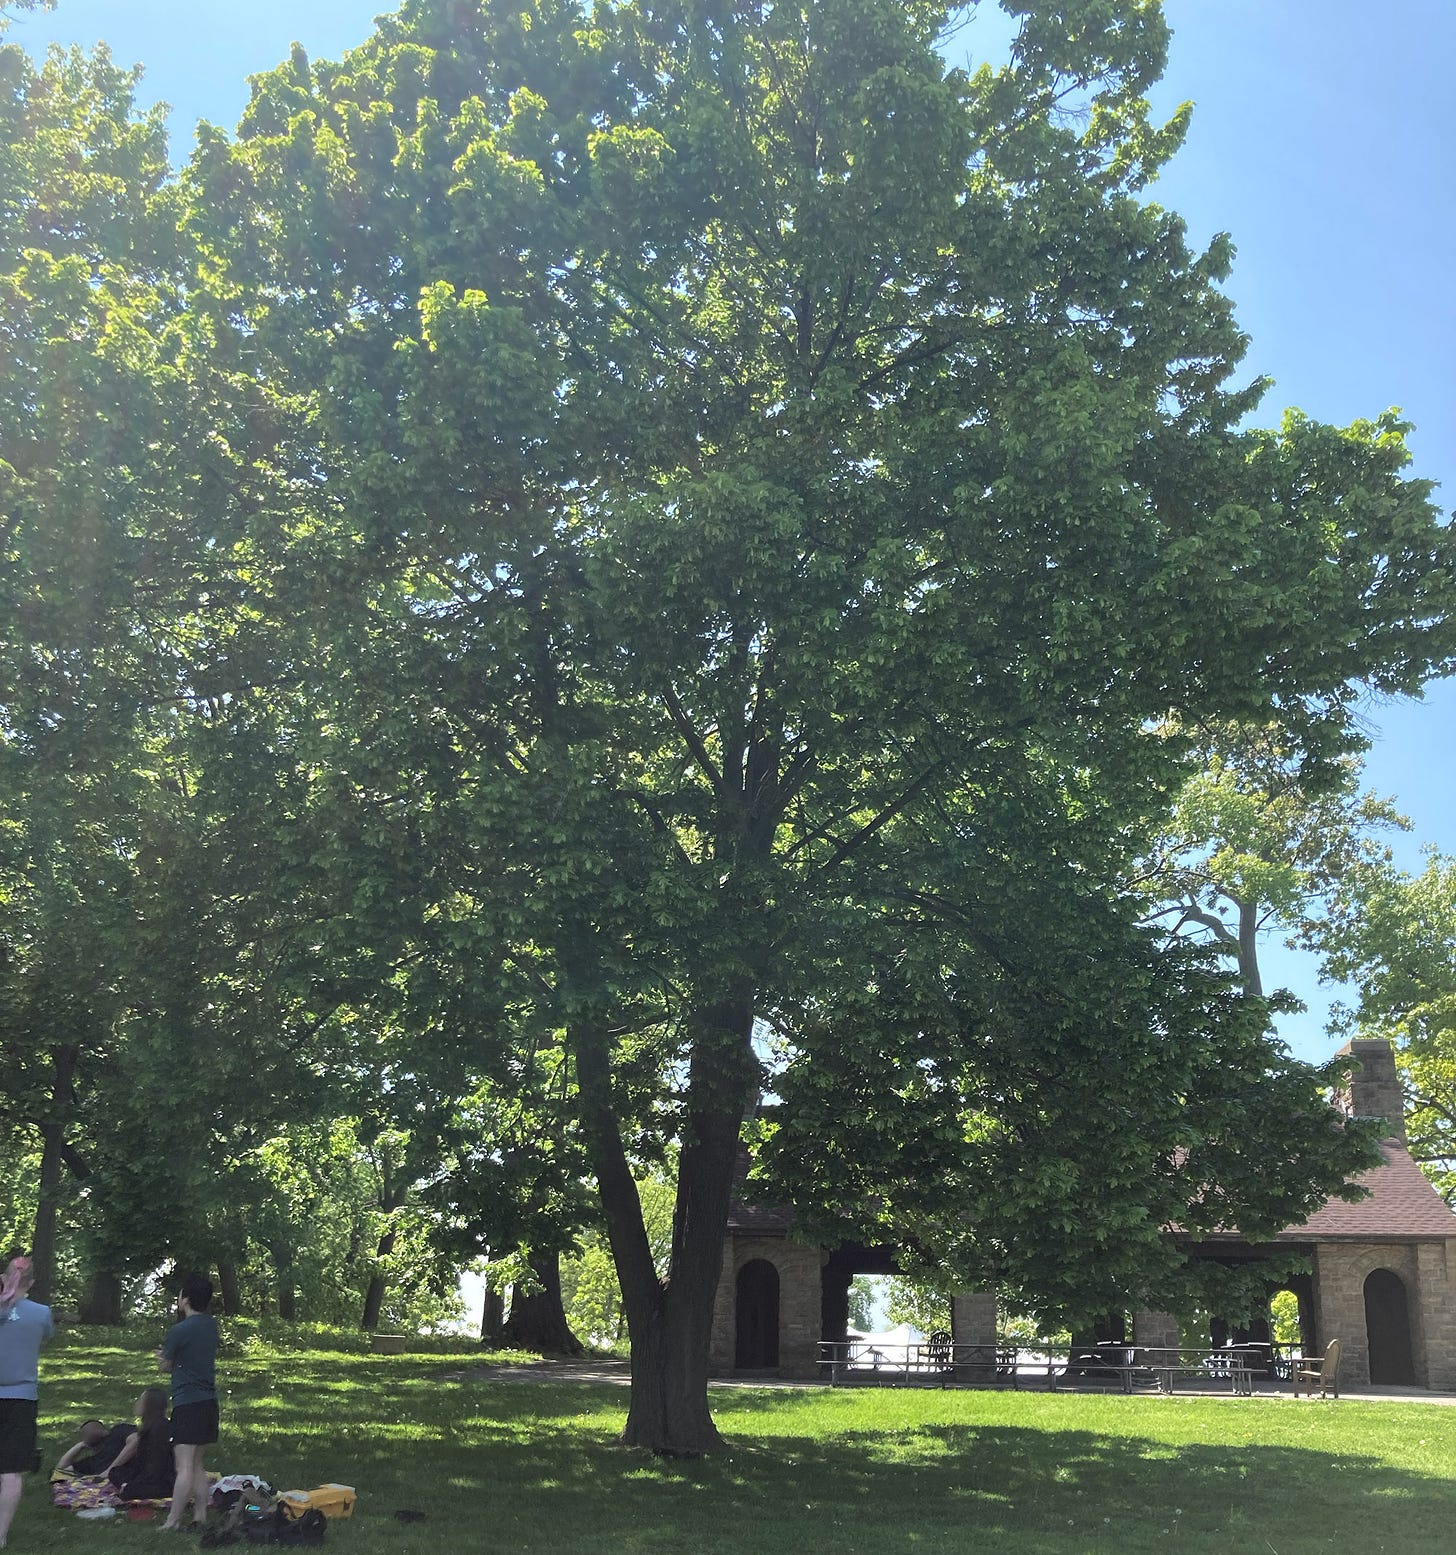 A linden tree in a park